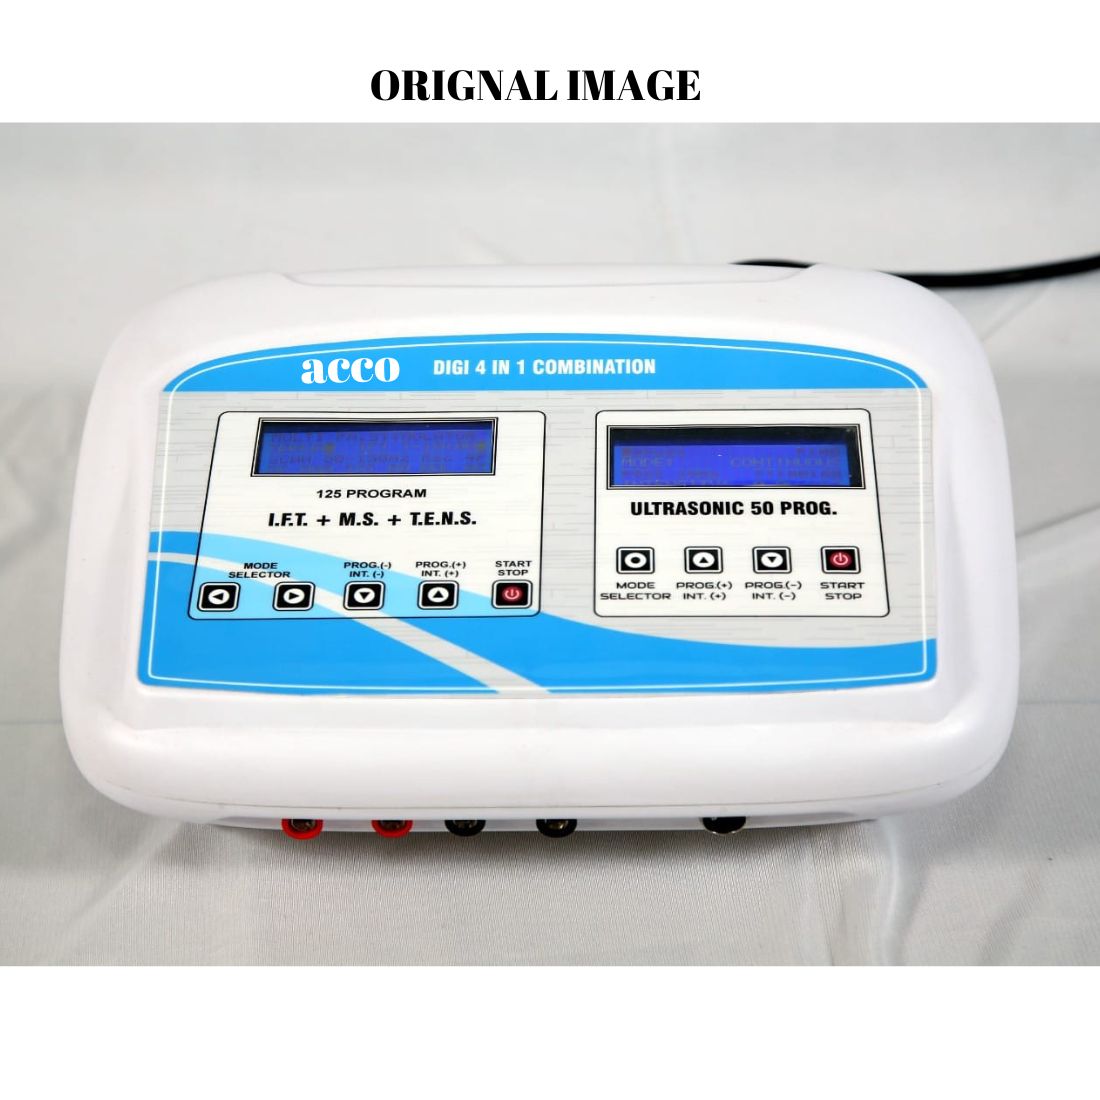 acco 4 in 1 Physiotherapy Combo IFT MS TENS(125Prg) + US 1Mhz (50Prg)